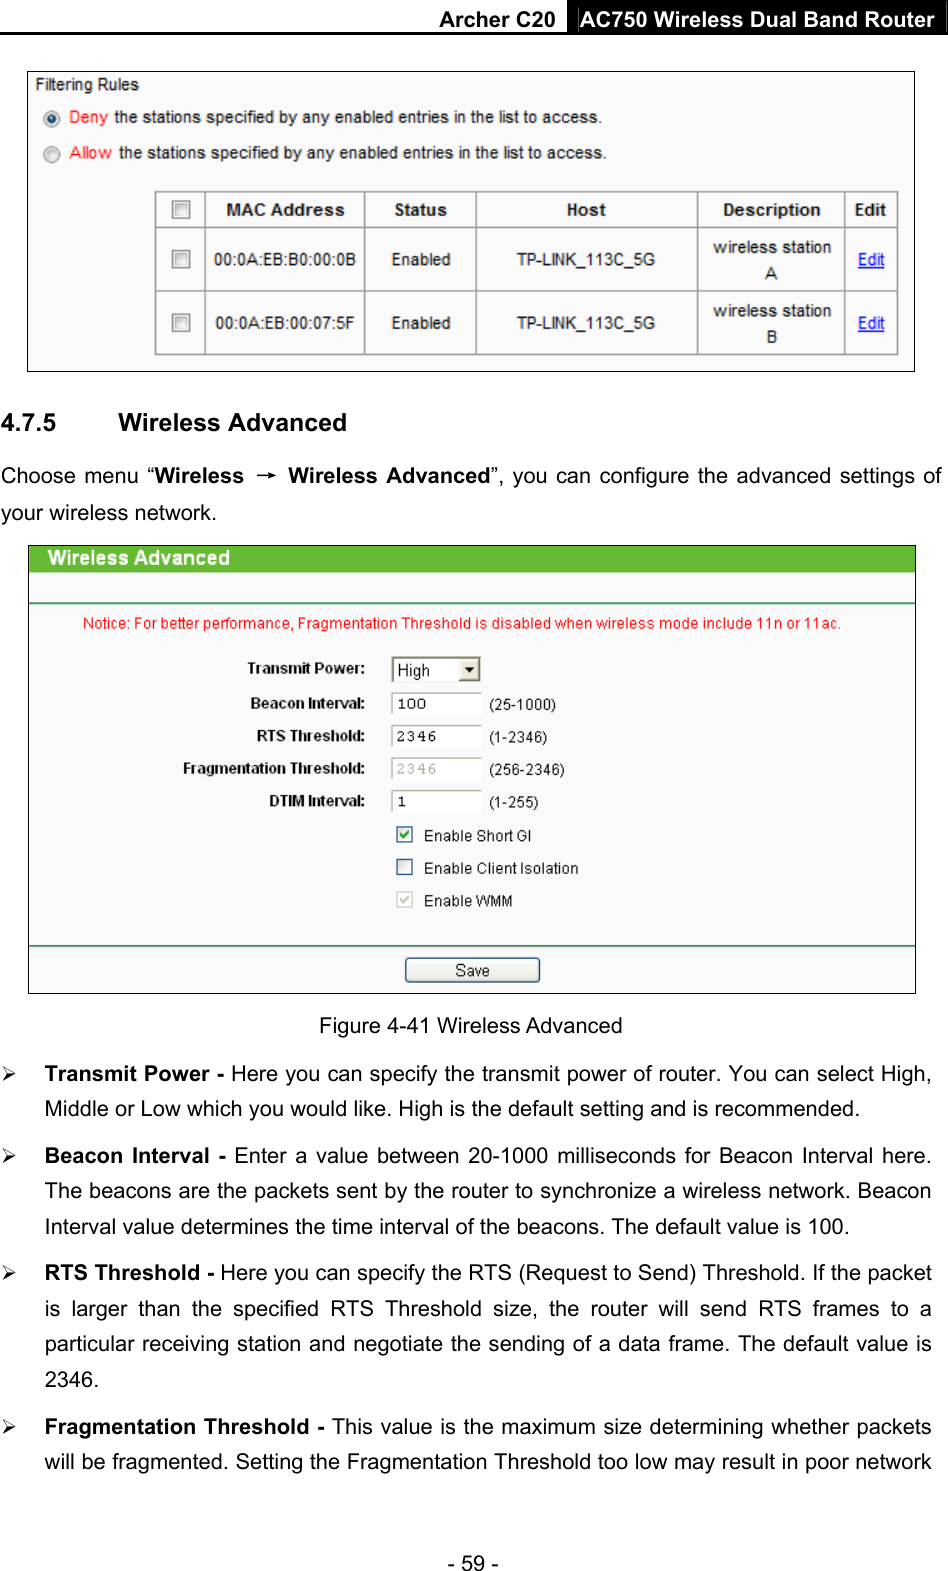 Archer C20 AC750 Wireless Dual Band Router - 59 -  4.7.5  Wireless Advanced Choose menu “Wireless  → Wireless Advanced”, you can configure the advanced settings of your wireless network.  Figure 4-41 Wireless Advanced  Transmit Power - Here you can specify the transmit power of router. You can select High, Middle or Low which you would like. High is the default setting and is recommended.  Beacon Interval - Enter a value between 20-1000 milliseconds for Beacon Interval here. The beacons are the packets sent by the router to synchronize a wireless network. Beacon Interval value determines the time interval of the beacons. The default value is 100.    RTS Threshold - Here you can specify the RTS (Request to Send) Threshold. If the packet is larger than the specified RTS Threshold size, the router will send RTS frames to a particular receiving station and negotiate the sending of a data frame. The default value is 2346.   Fragmentation Threshold - This value is the maximum size determining whether packets will be fragmented. Setting the Fragmentation Threshold too low may result in poor network 